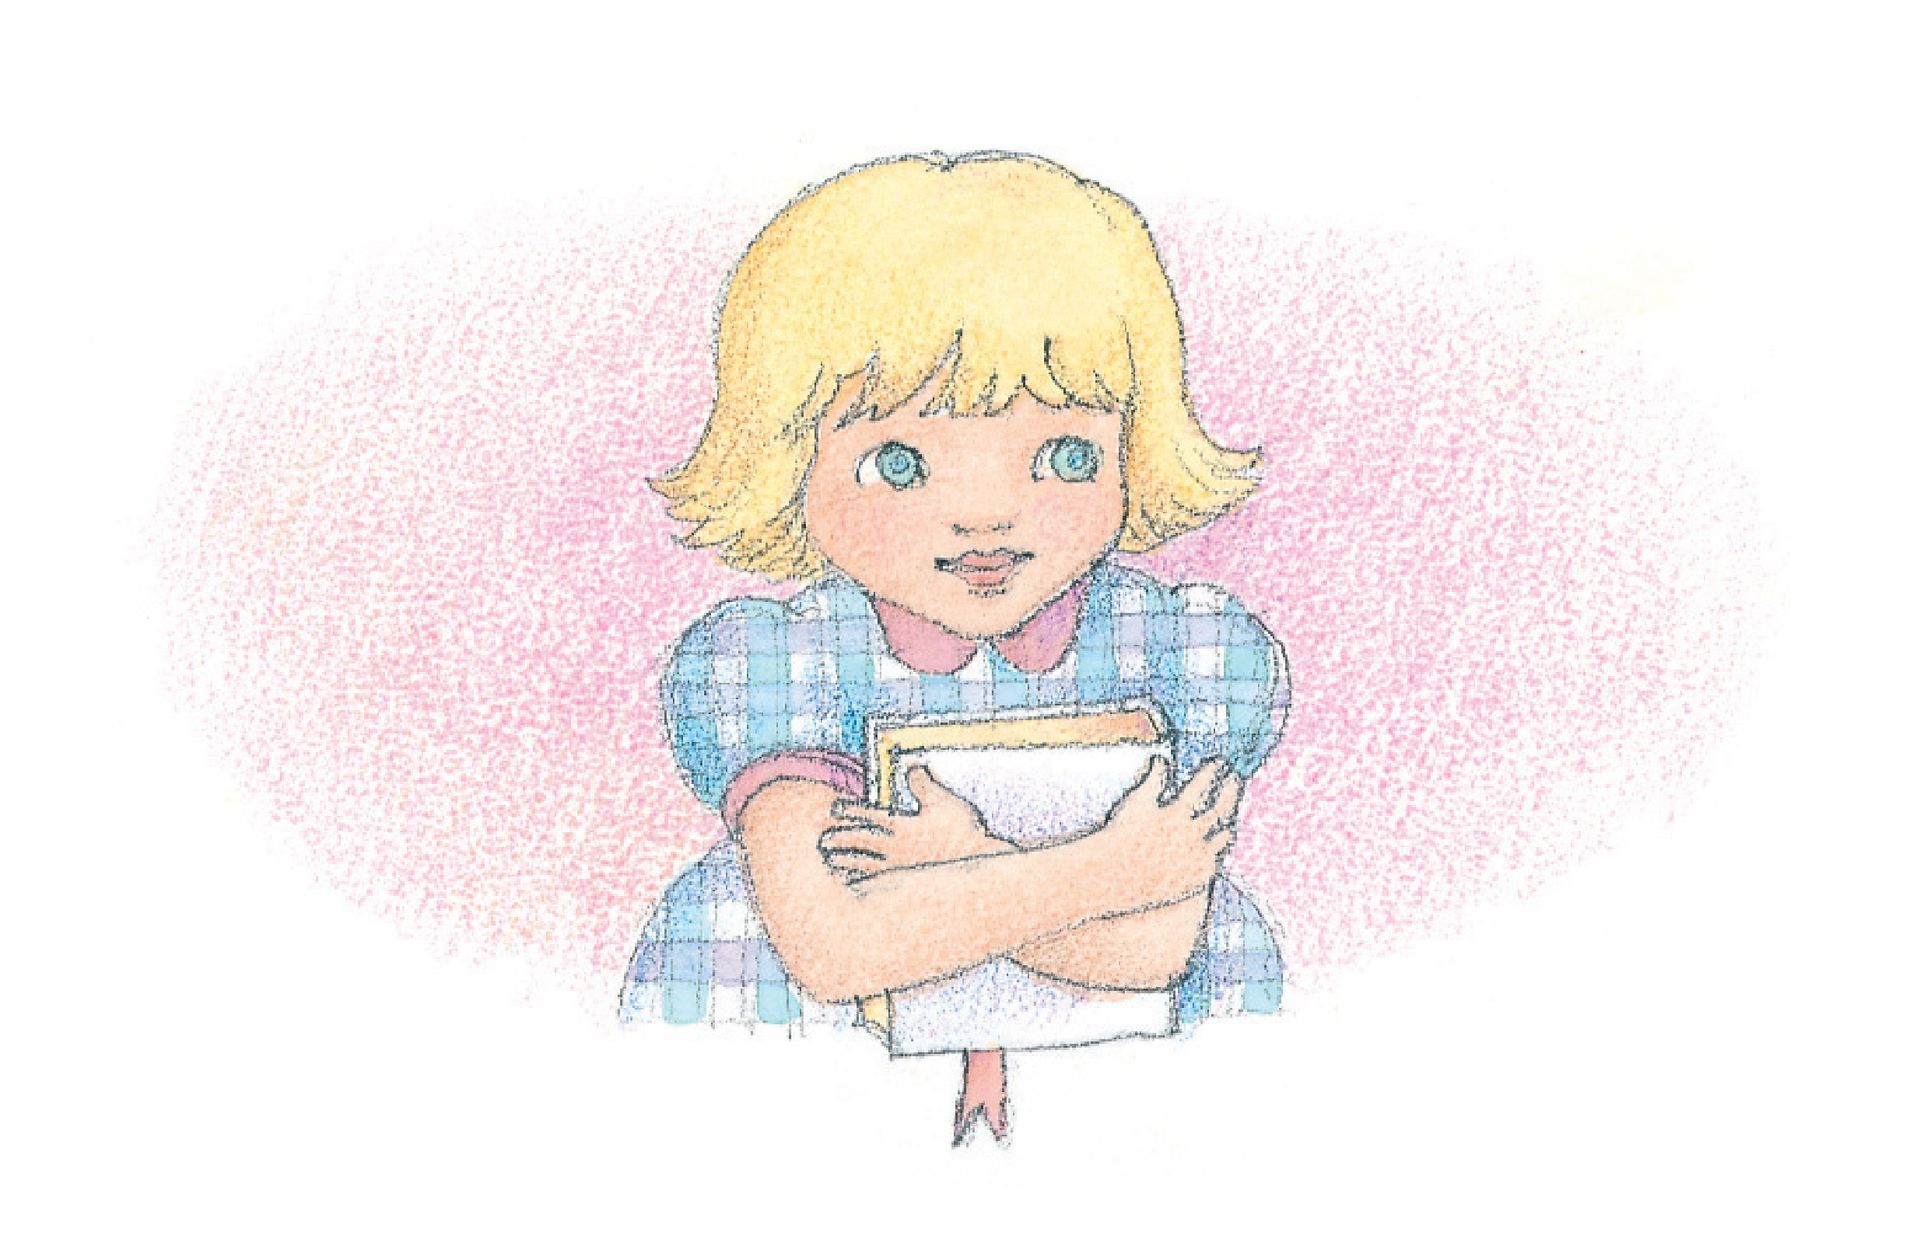 A girl holding her scriptures. From the Children’s Songbook, page 71, “To Think about Jesus”; watercolor illustration by Phyllis Luch.